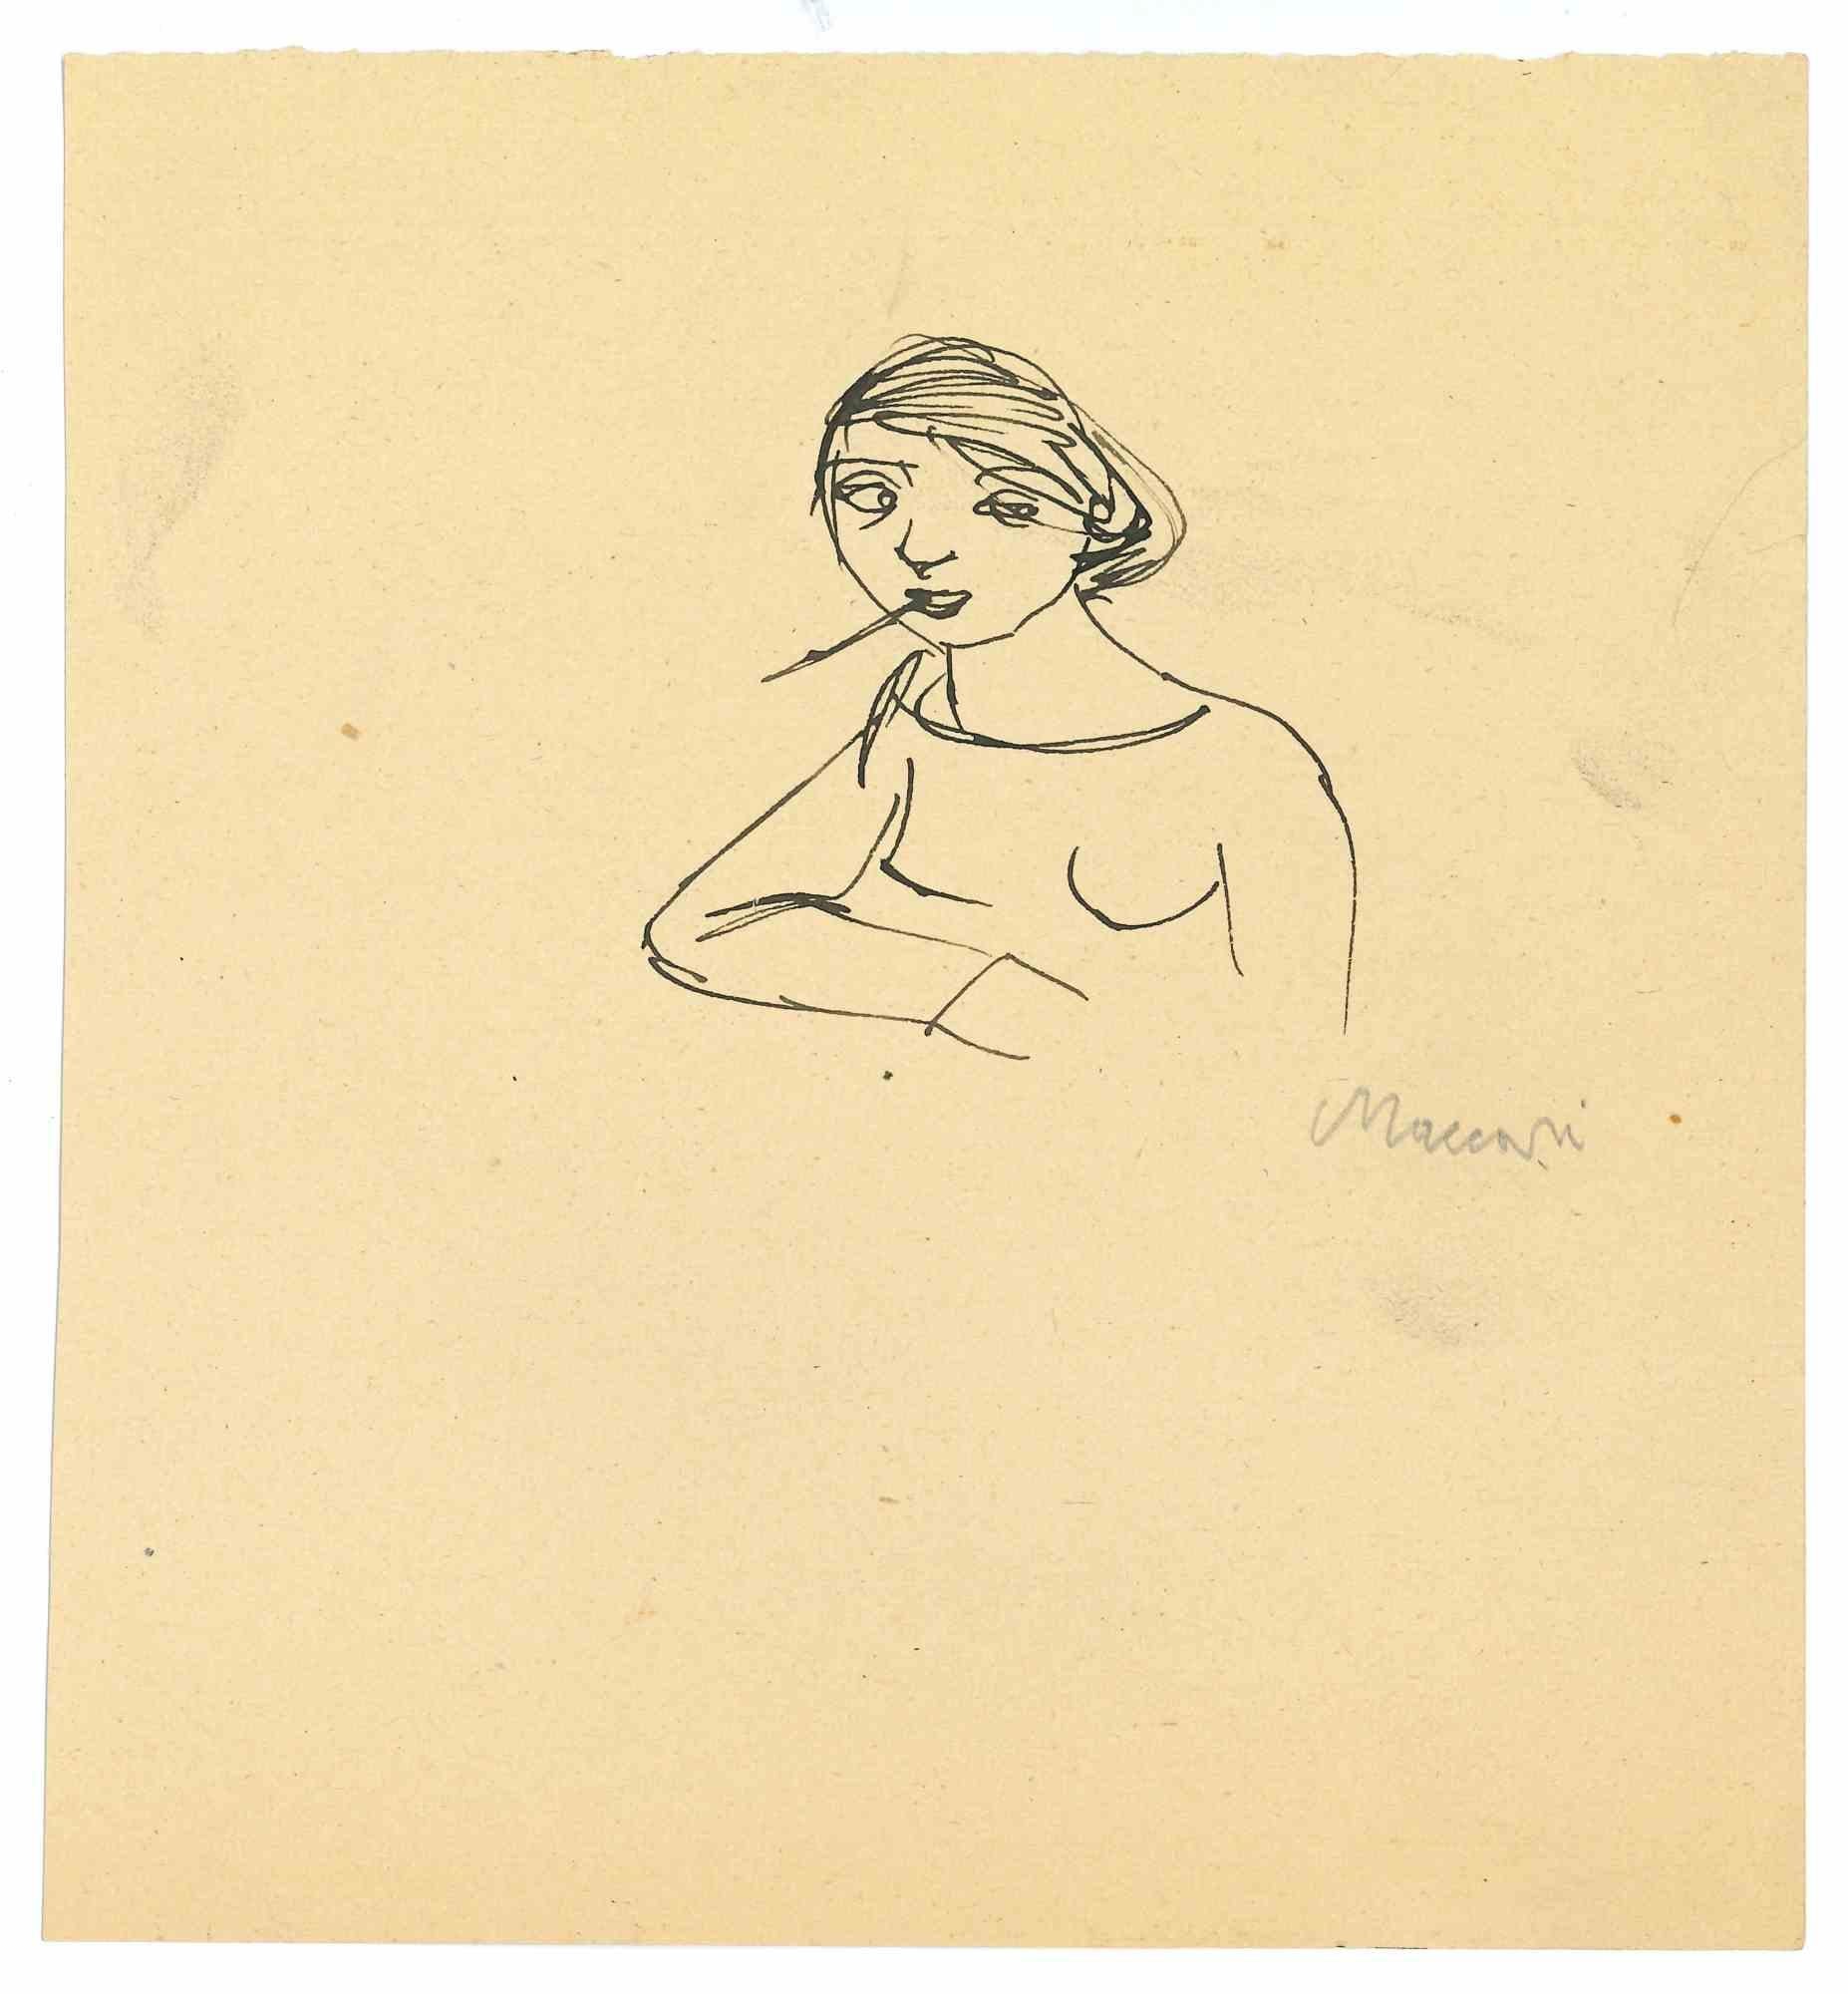 Smoking Woman is a Pen and China Drawing realized by Mino Maccari  (1924-1989) in the 1955 ca.

Hand-signed on the lower.

Good conditions.

Mino Maccari (Siena, 1924-Rome, June 16, 1989) was an Italian writer, painter, engraver and journalist,